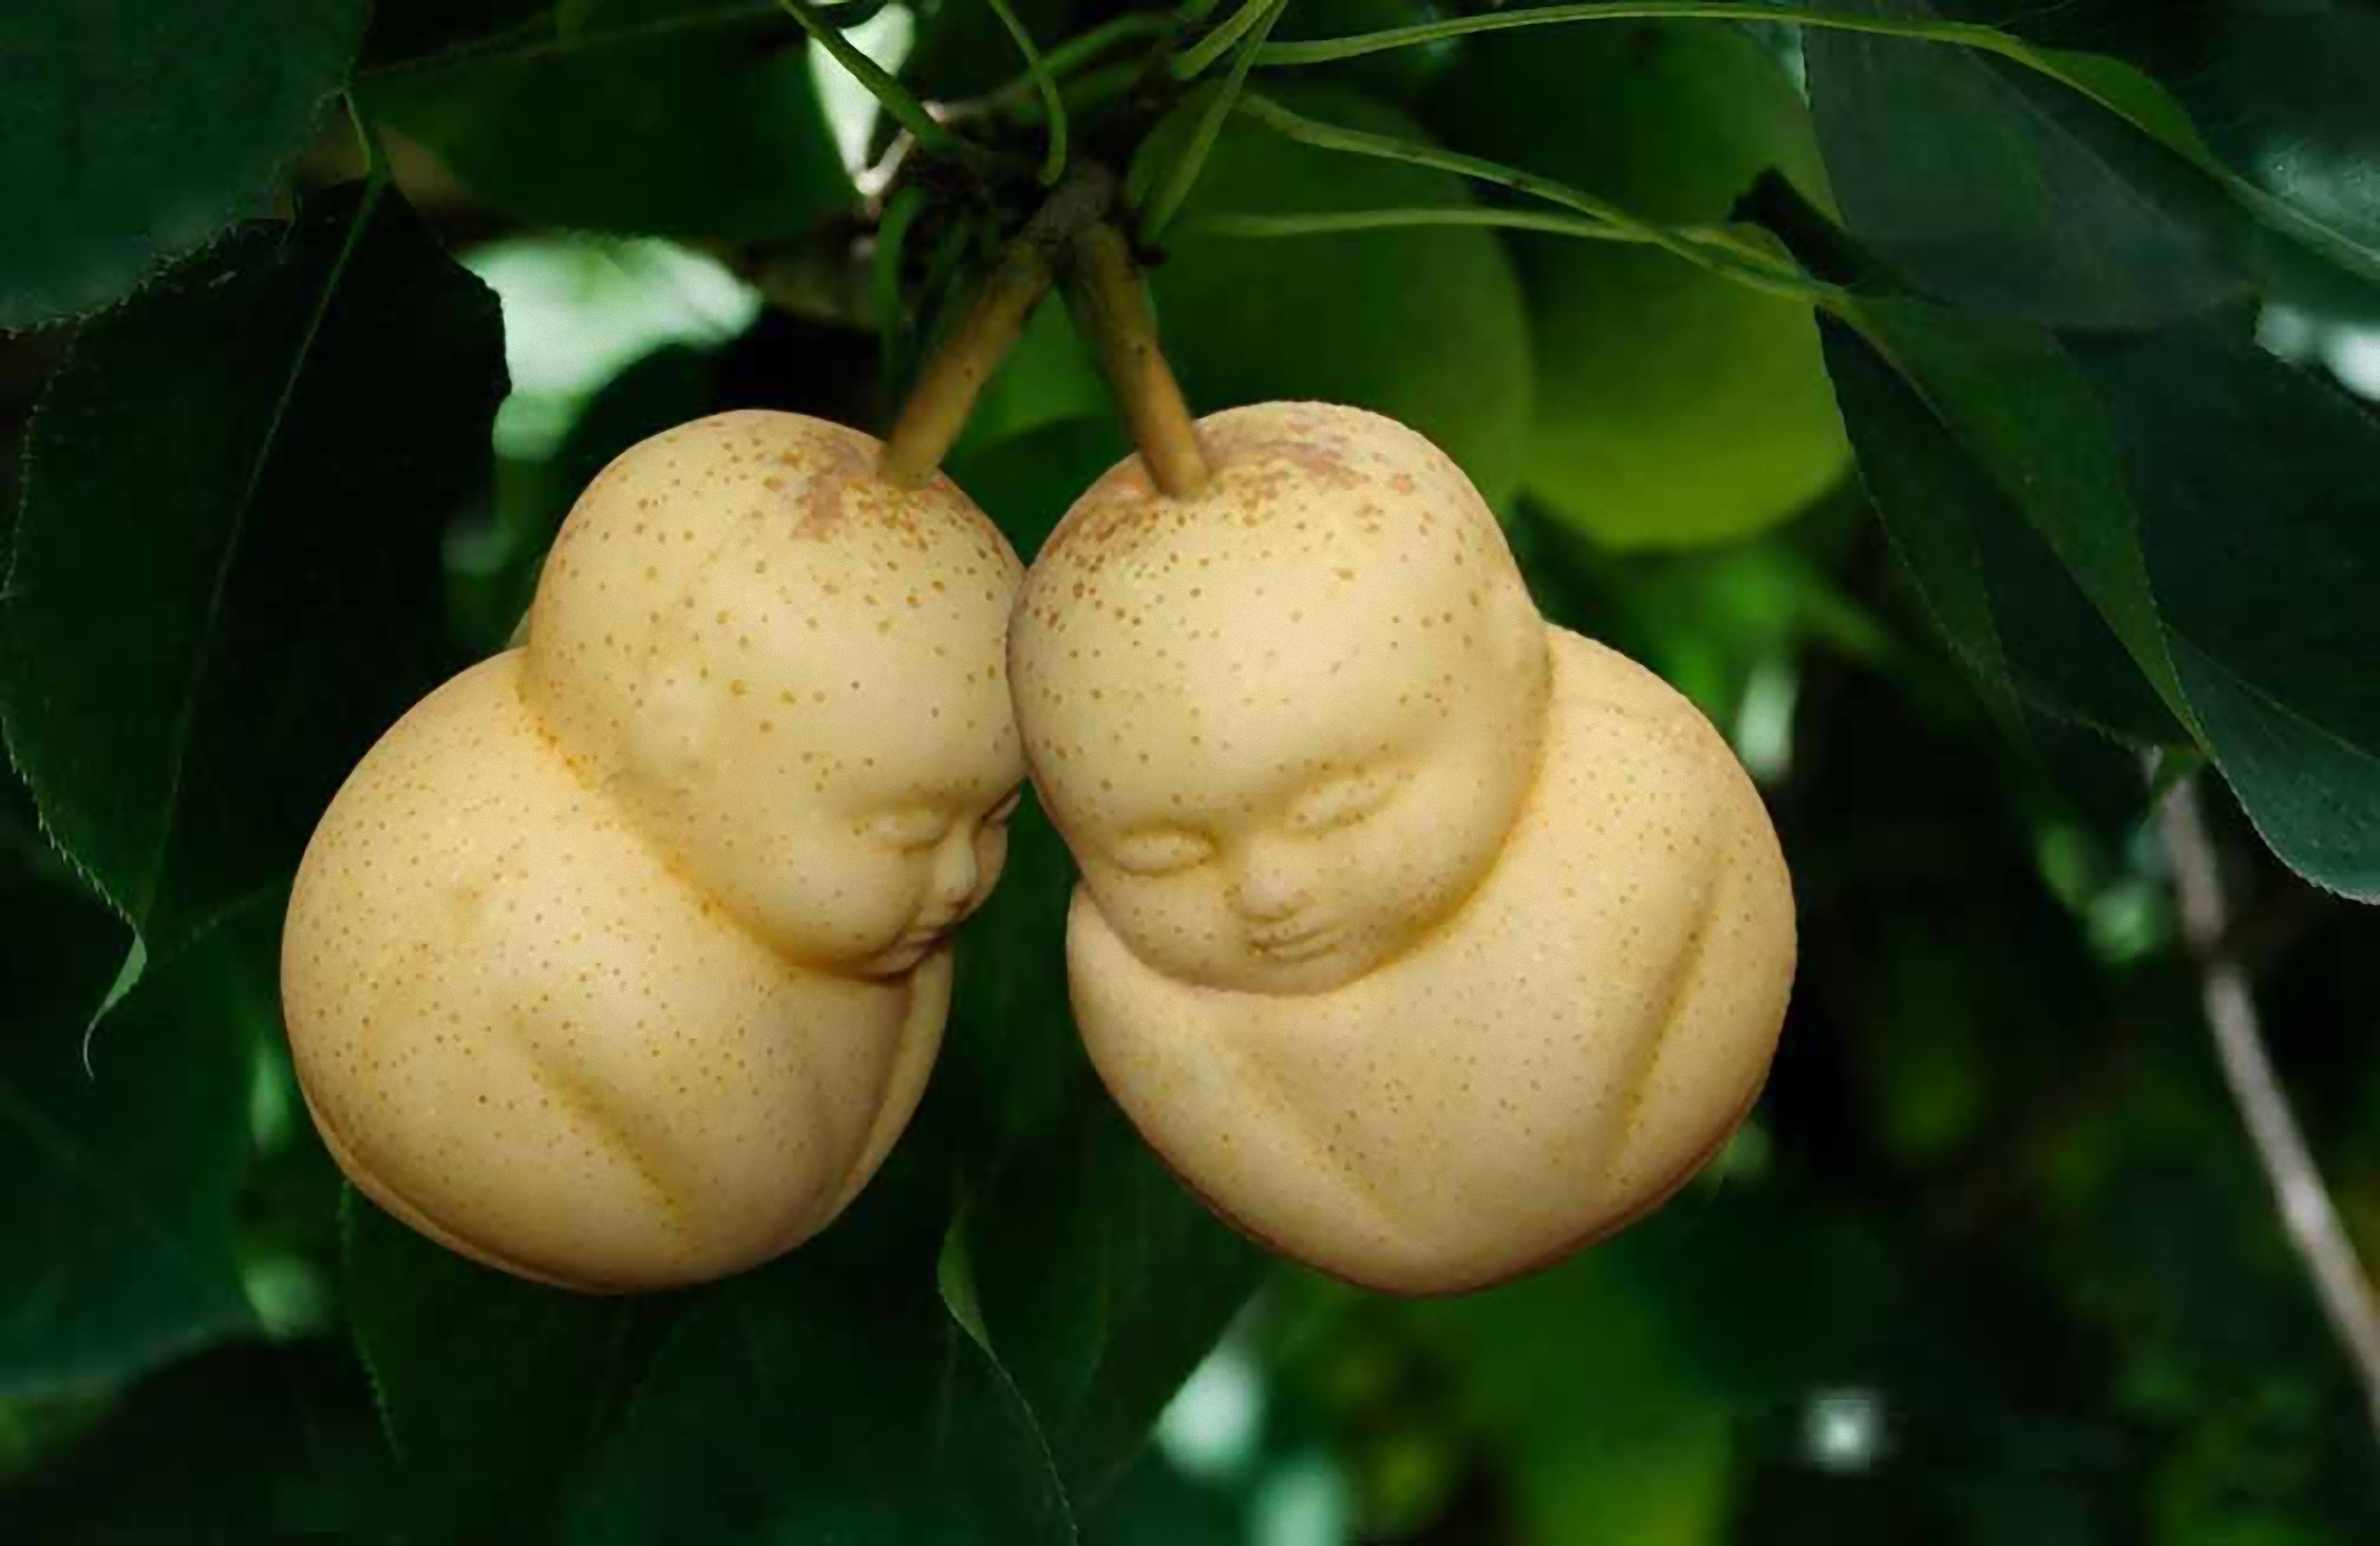 Pears Shaped Like Babies Are a Hit In China - D-brief